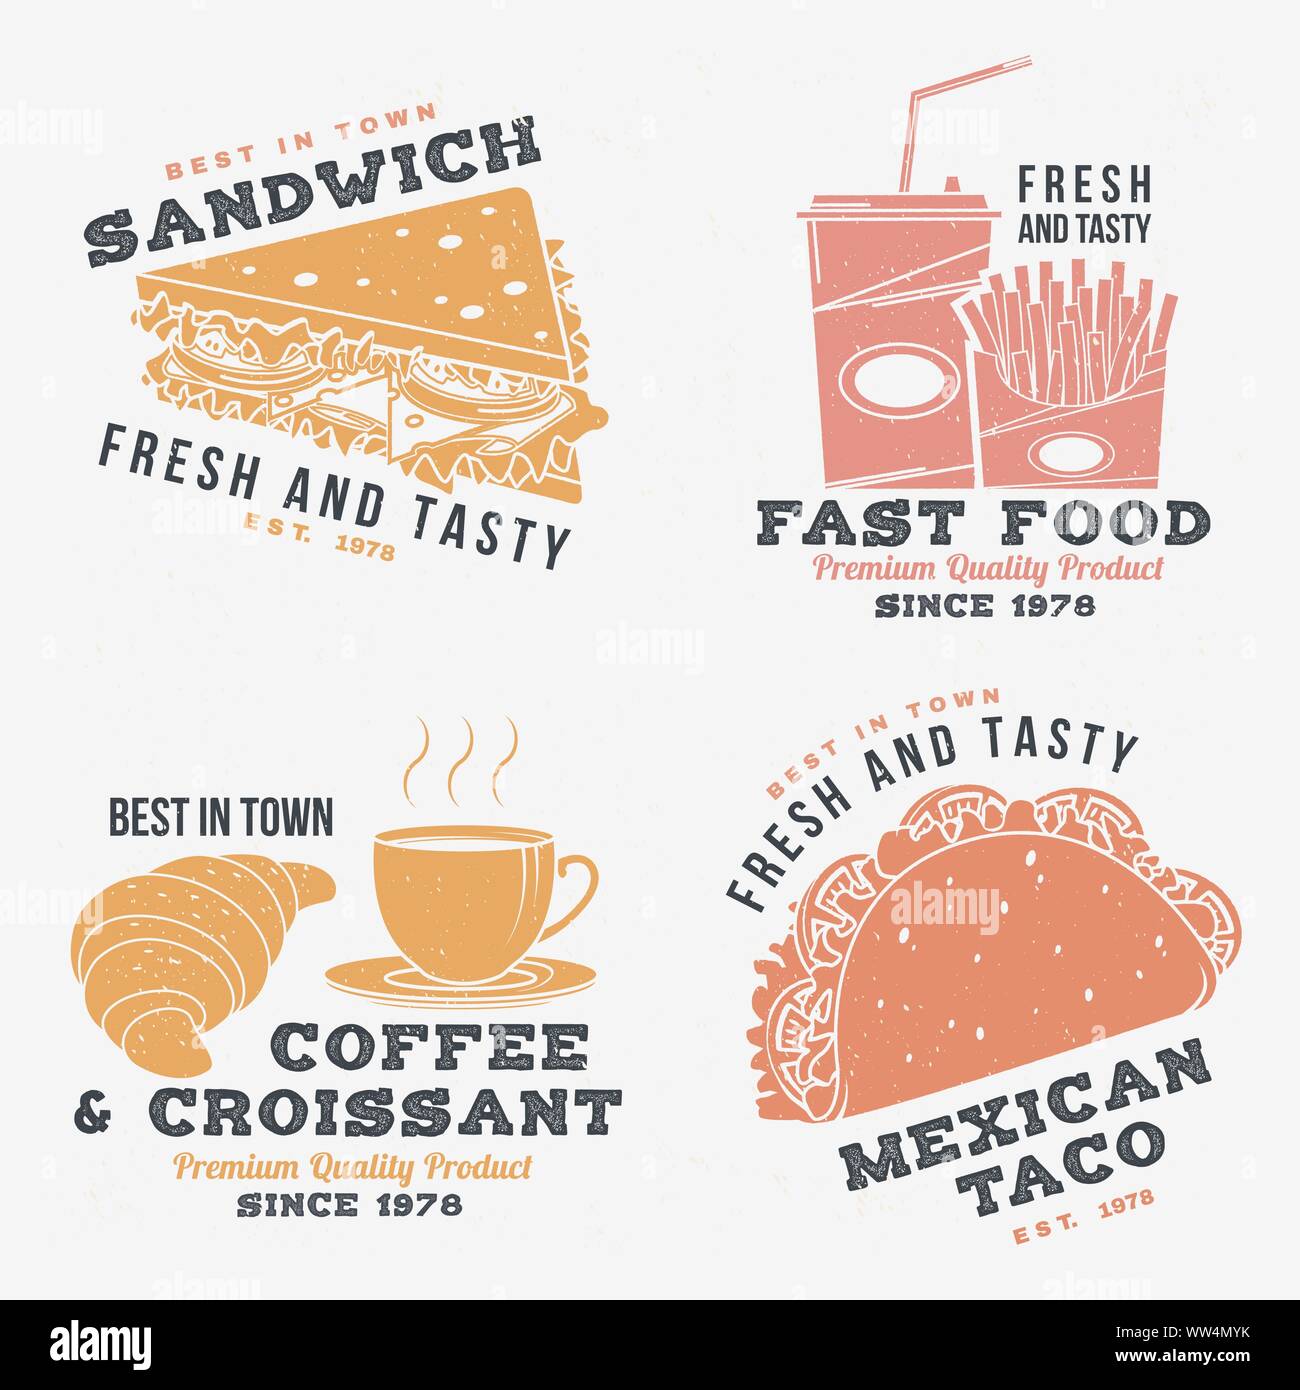 Set of fast food retro badge design. Vector. Vintage design with sandwich, coffee, taco, croissant for pub or fast food business. Template for restaurant identity objects, packaging and menu Stock Vector